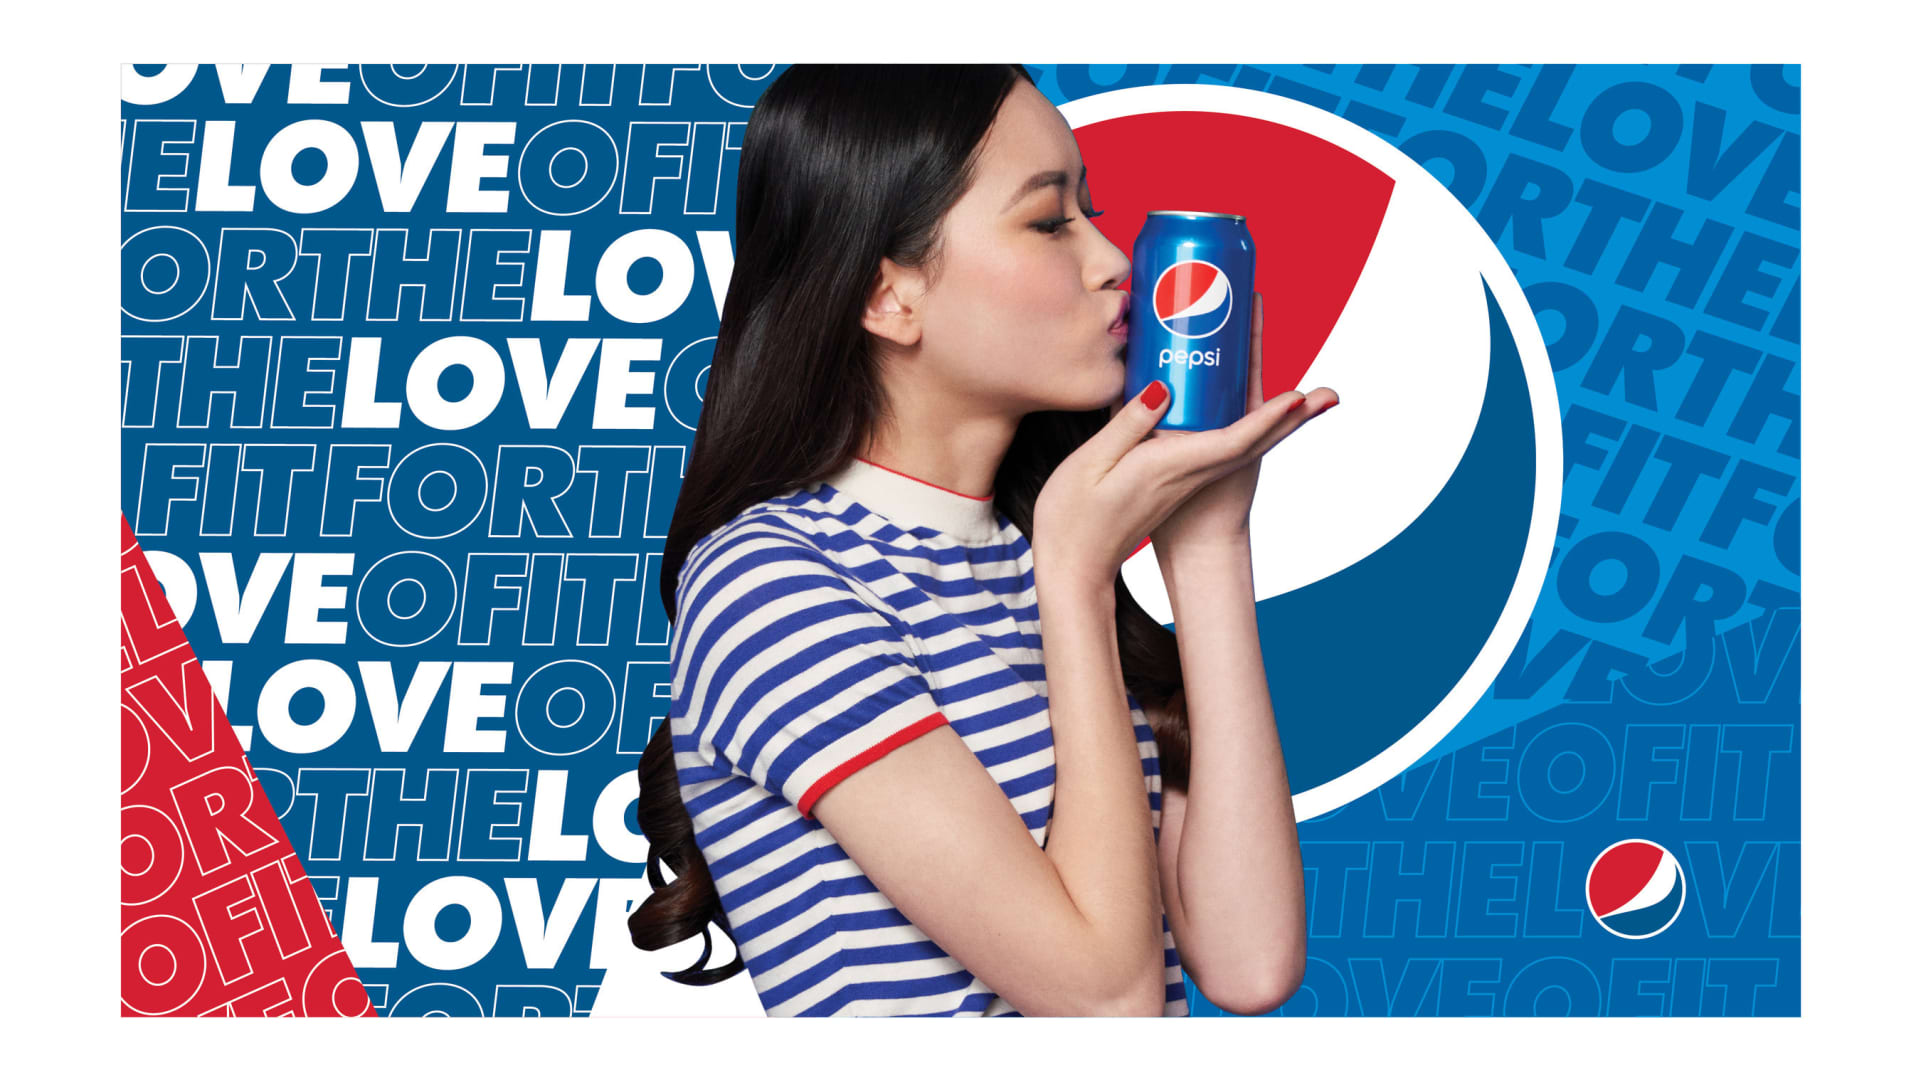 Pepsi has a new ad slogan. And it's already dividing opinion